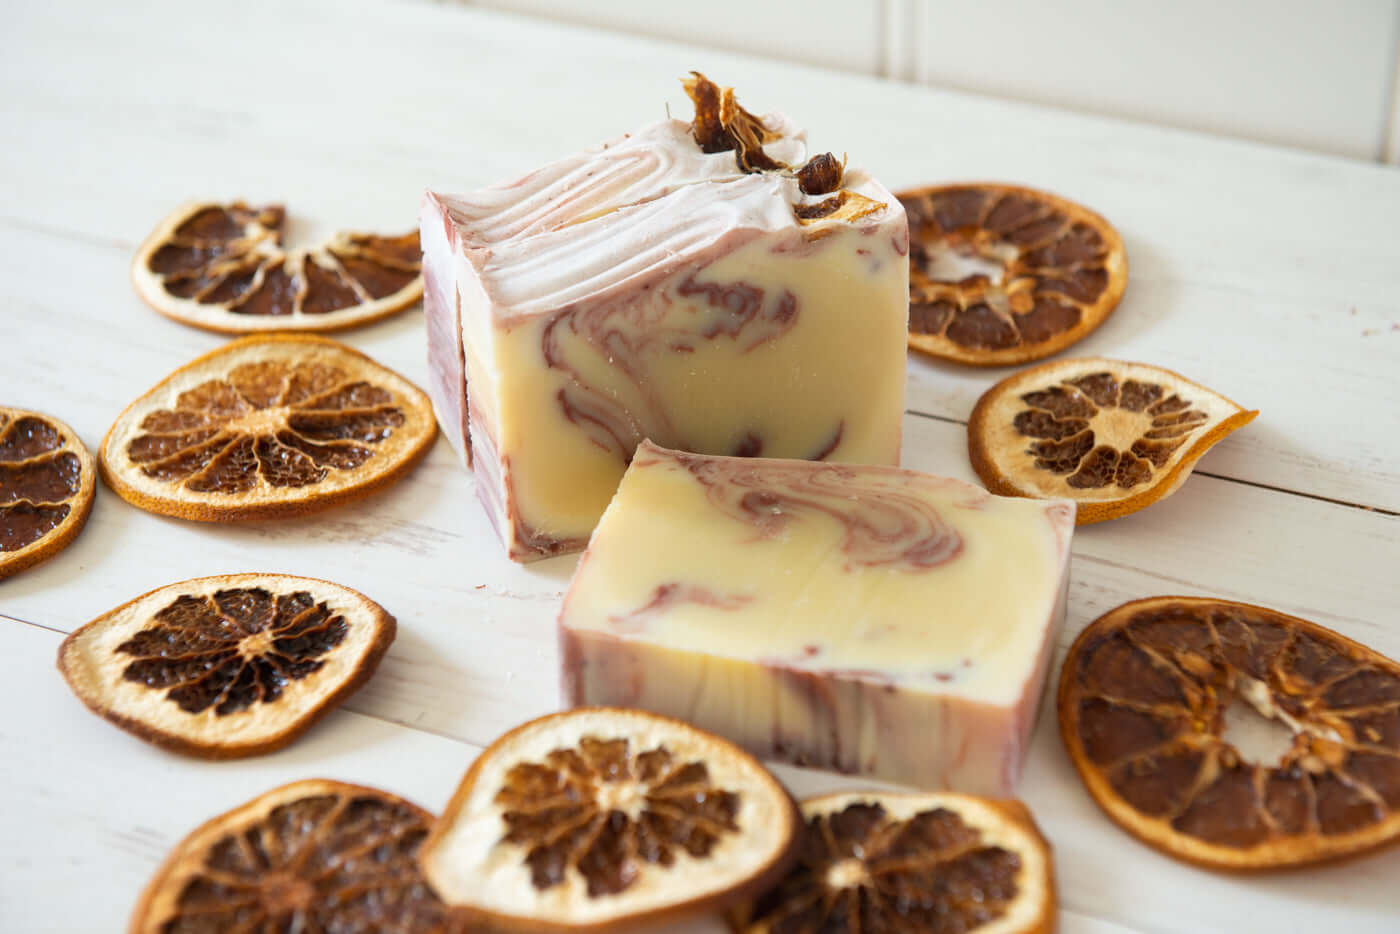 This handmade natural soap with Grapefruit & Australian Pink Clay Soap deeply nourishes your skin